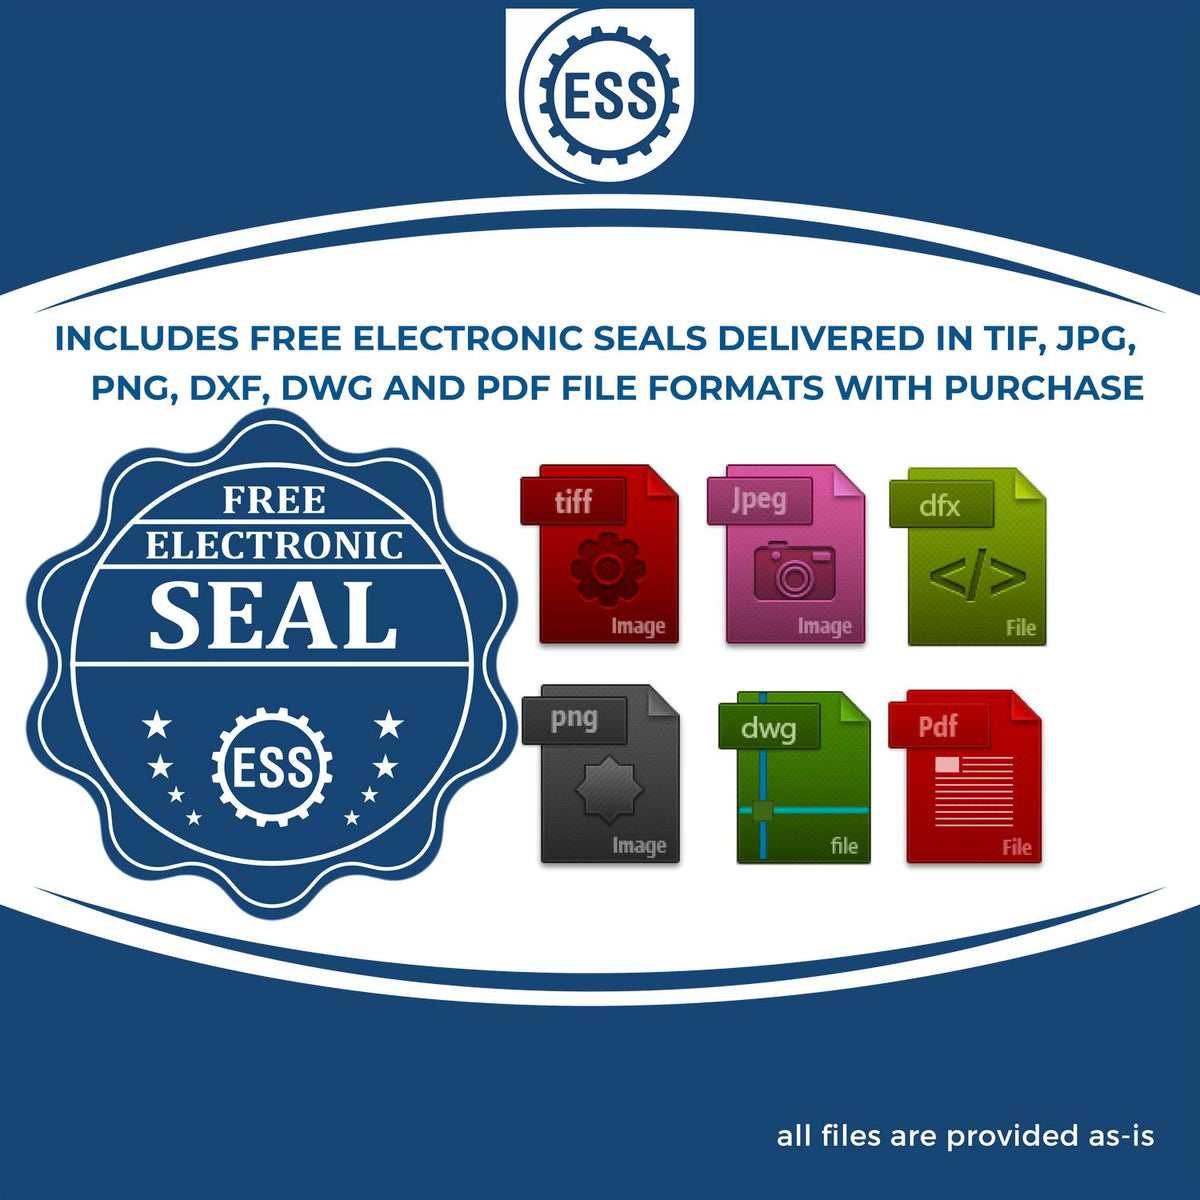 An infographic for the free electronic seal for the Hybrid Mississippi Geologist Seal illustrating the different file type icons such as DXF, DWG, TIF, JPG and PNG.